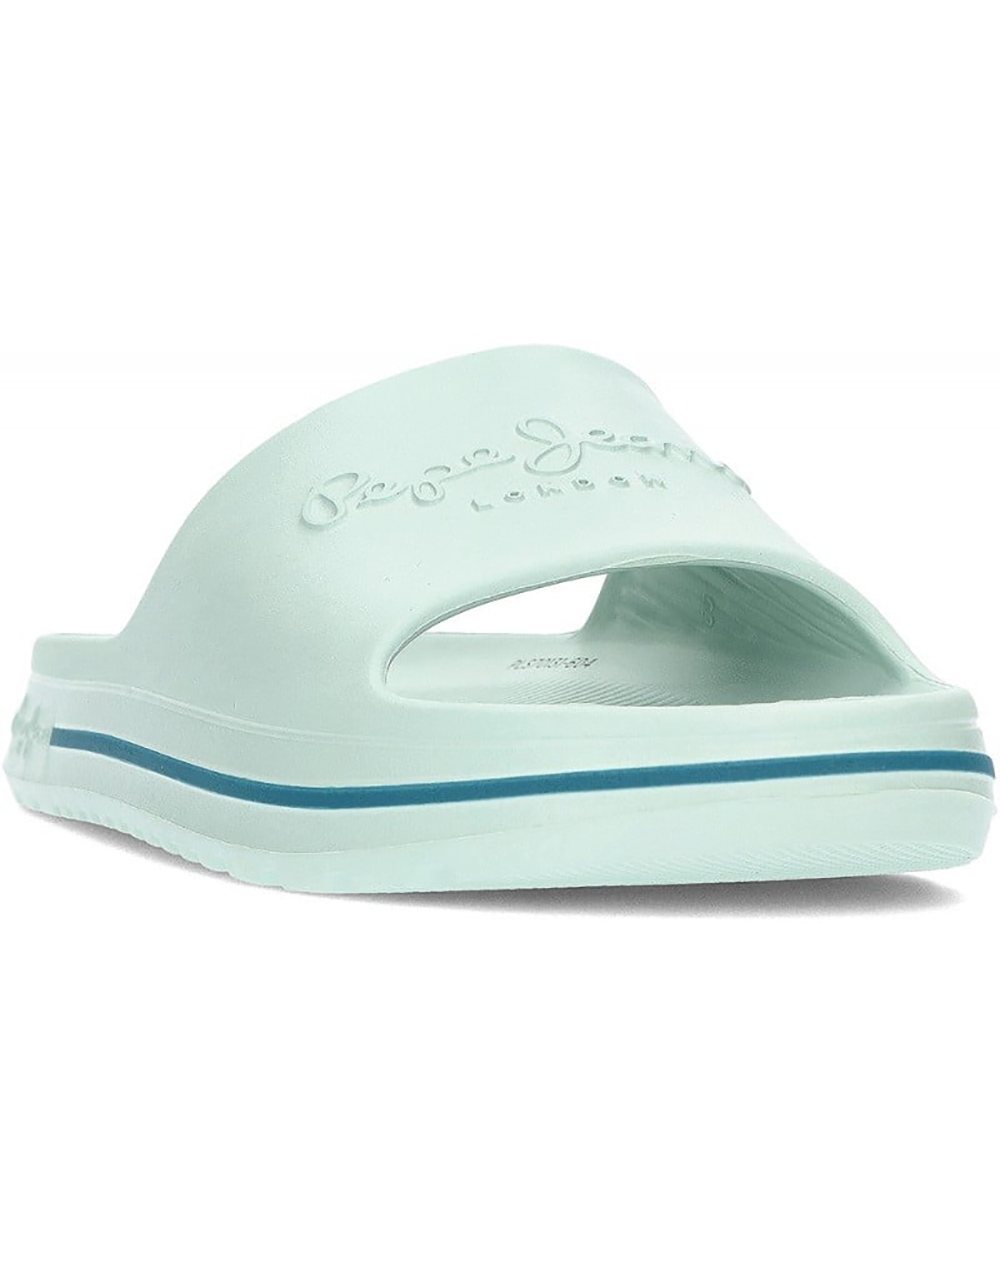 PEPE JEANS SOLD OUT DROP 1 BEACH SLIDE W BEACH ΠΑΠΟΥΤΣΙ ΓΥΝΑΙΚΕΙΟ